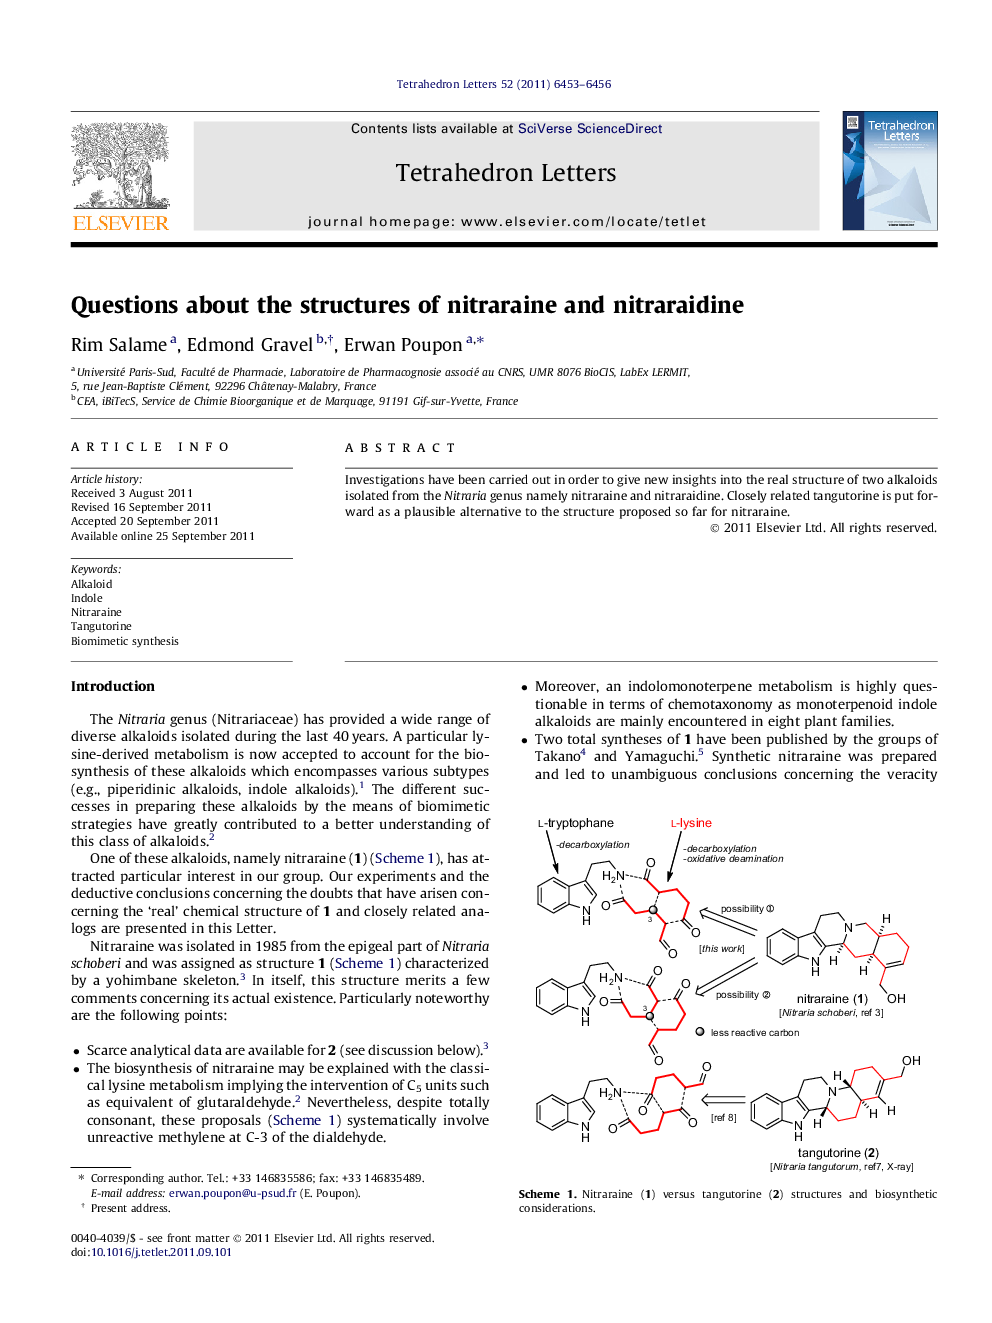 Questions about the structures of nitraraine and nitraraidine